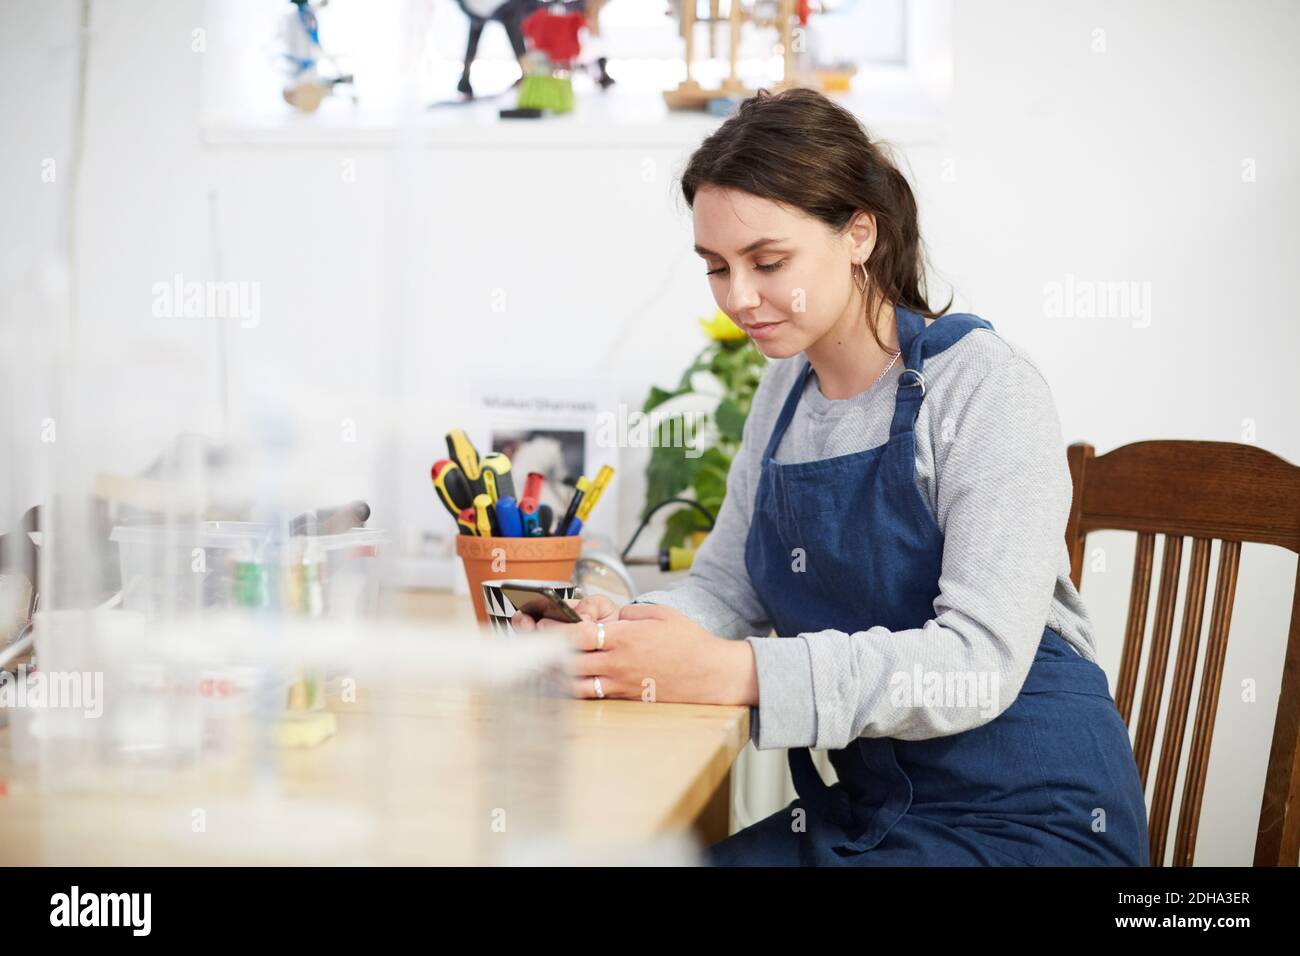 Young female engineer using smart phone at table in workshop Stock Photo